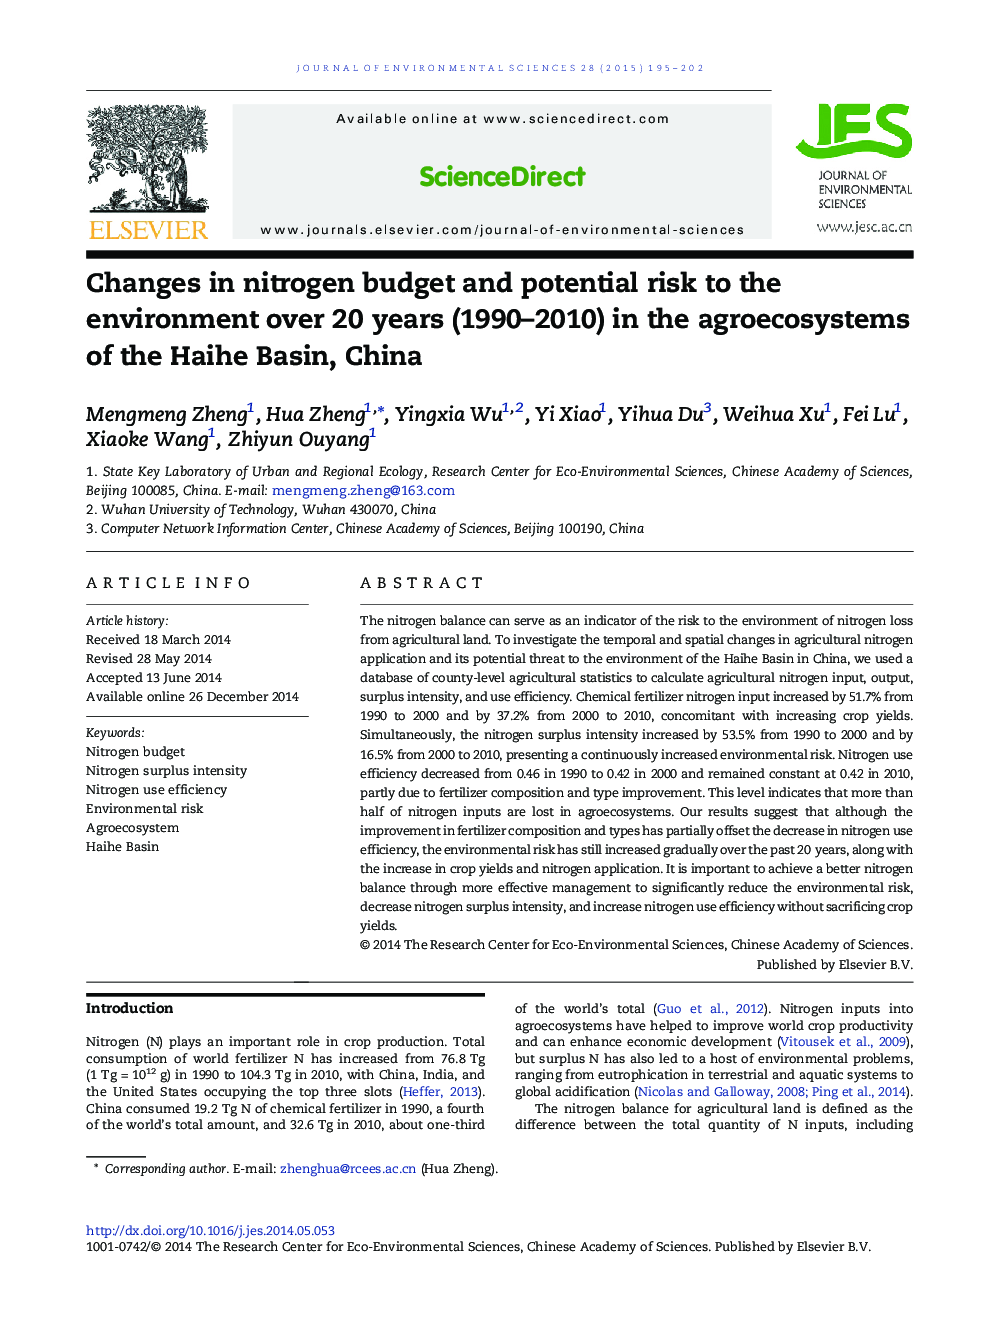 Changes in nitrogen budget and potential risk to the environment over 20 years (1990–2010) in the agroecosystems of the Haihe Basin, China